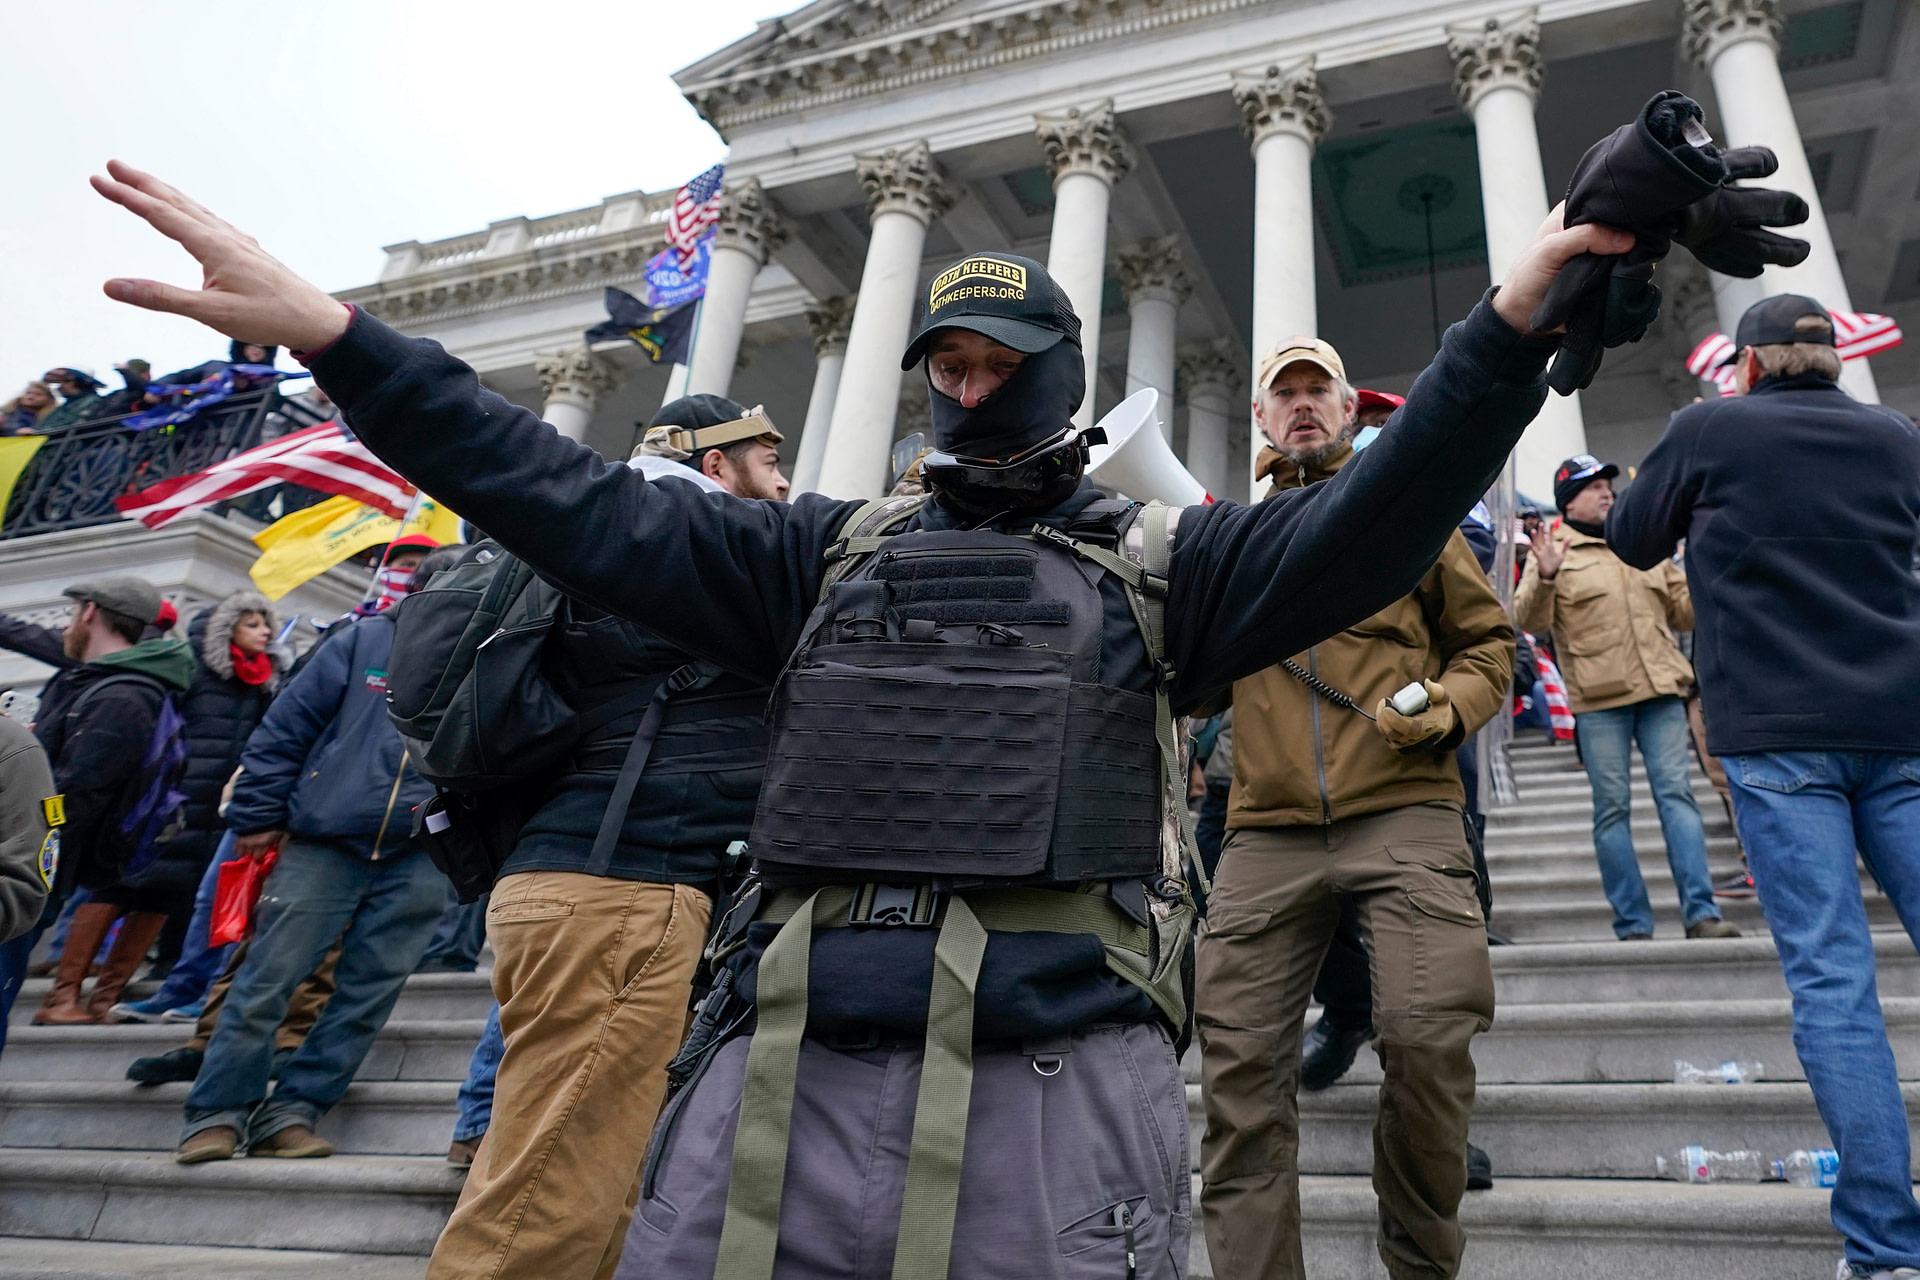 DOJ cites threats to democracy on Jan. 6 in push for steep Oath Keepers sentences